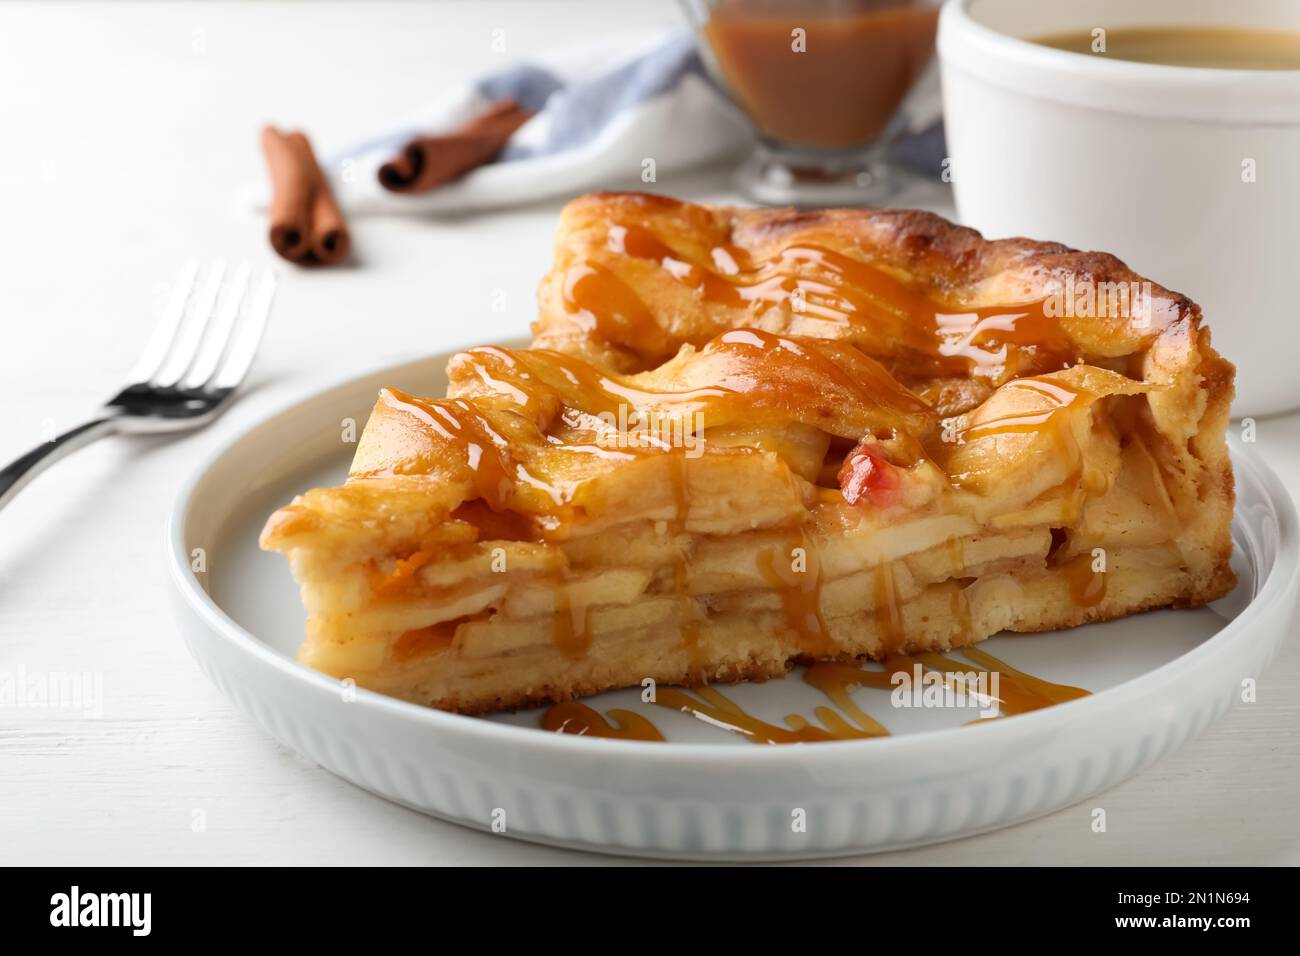 Slice of traditional apple pie on white wooden table, closeup Stock Photo